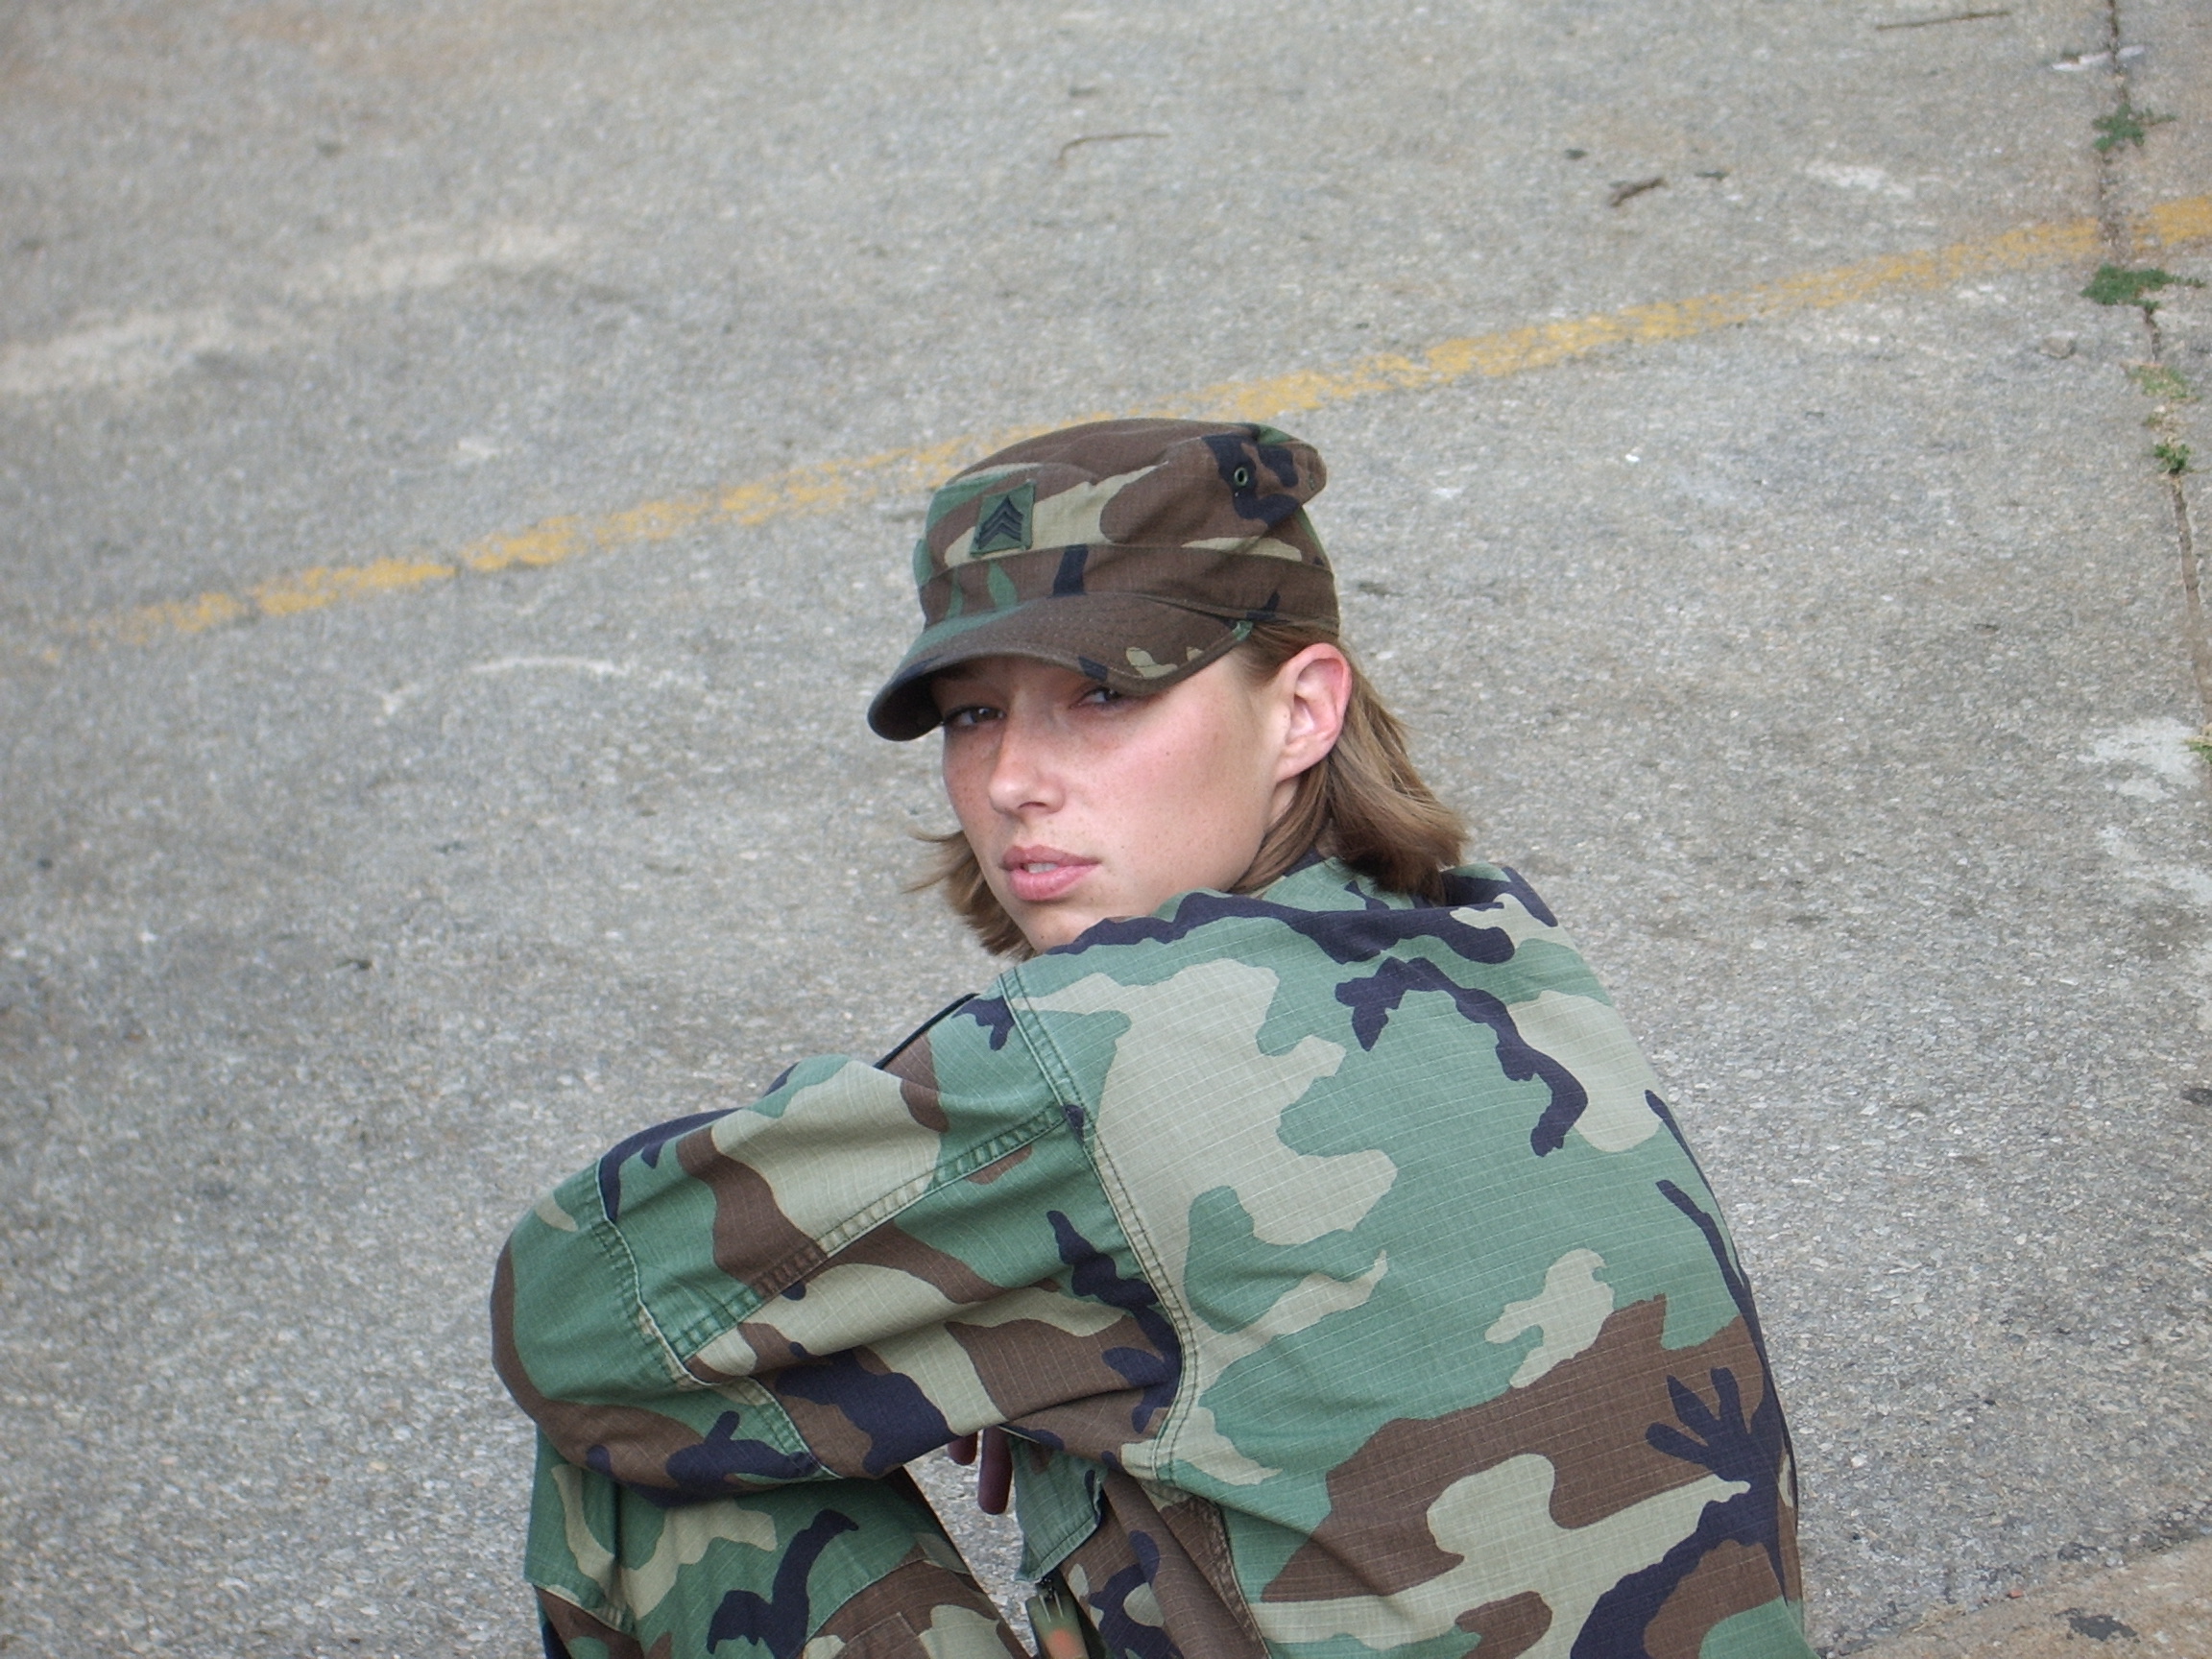 This photo shows a woman in military clothing.